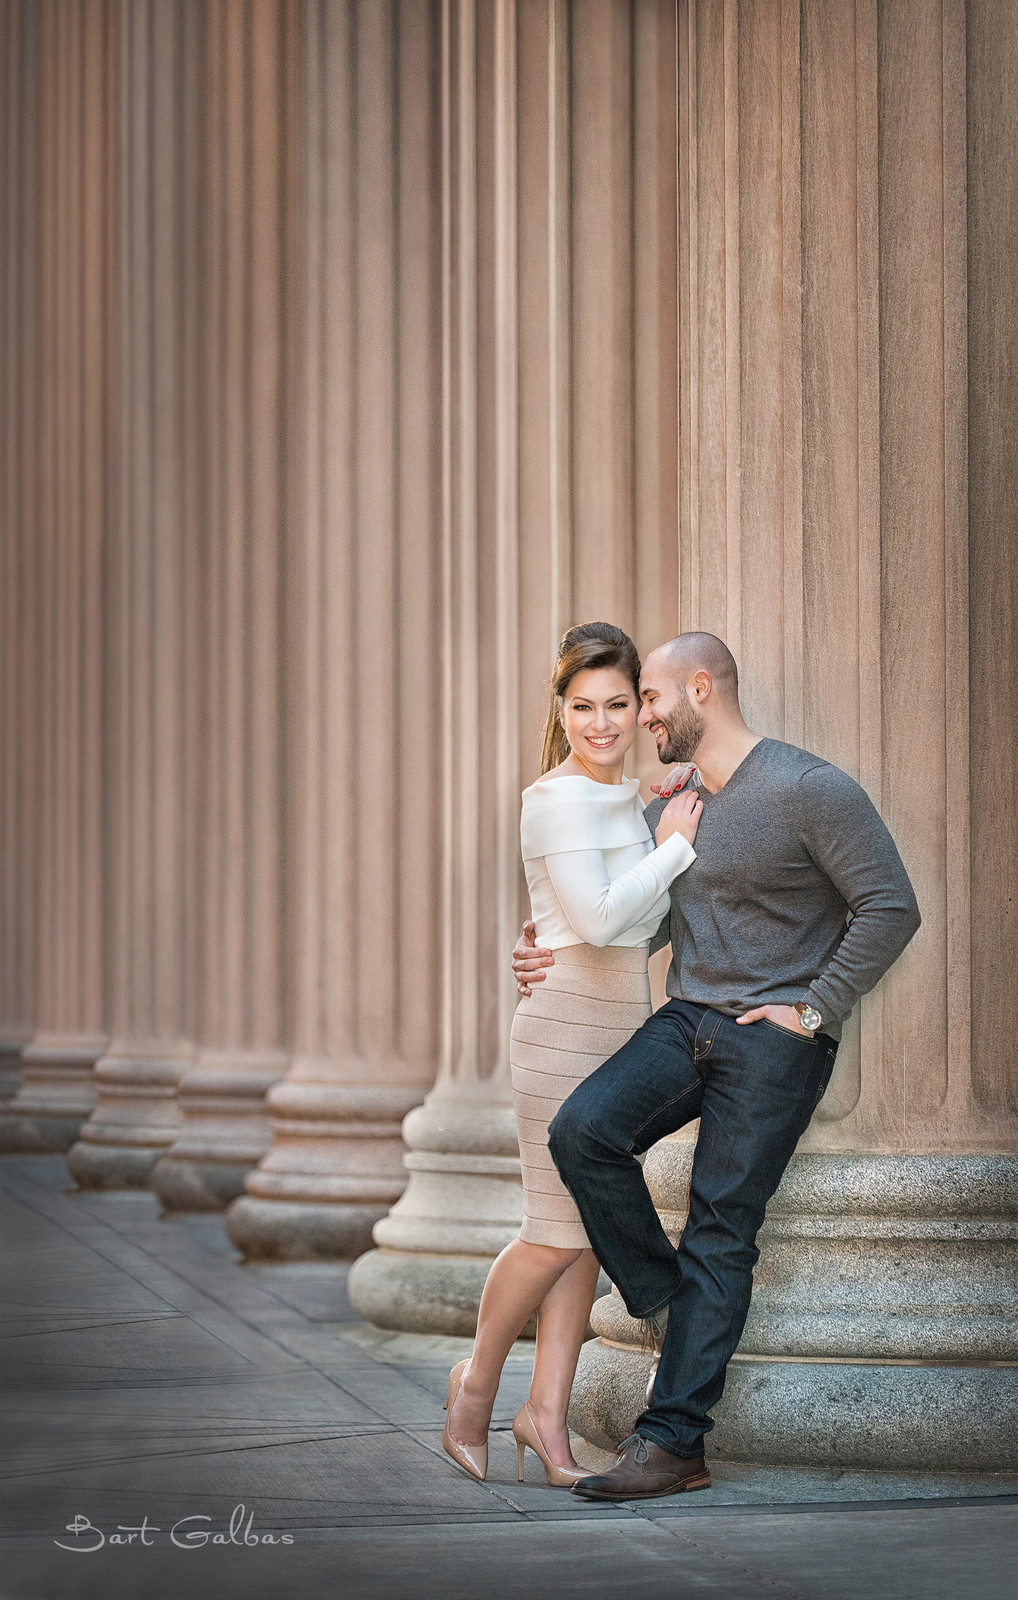 Chicago Board of Trade Building Engagement Portrait